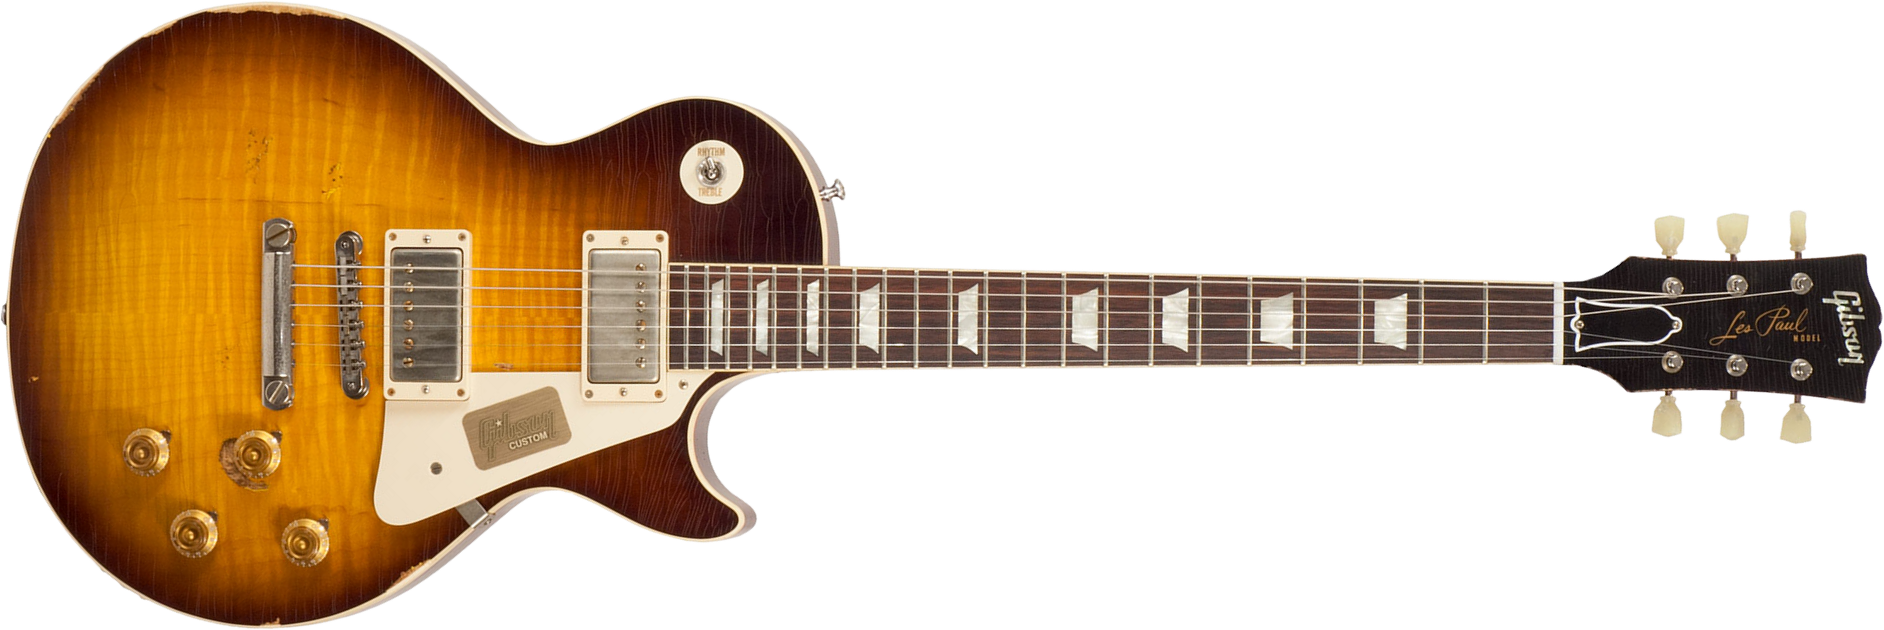 Gibson Custom Shop M2m Les Paul Standard 1958 2h Ht Rw #r862323 - Aged Kindred Burst Fade - Single cut electric guitar - Main picture